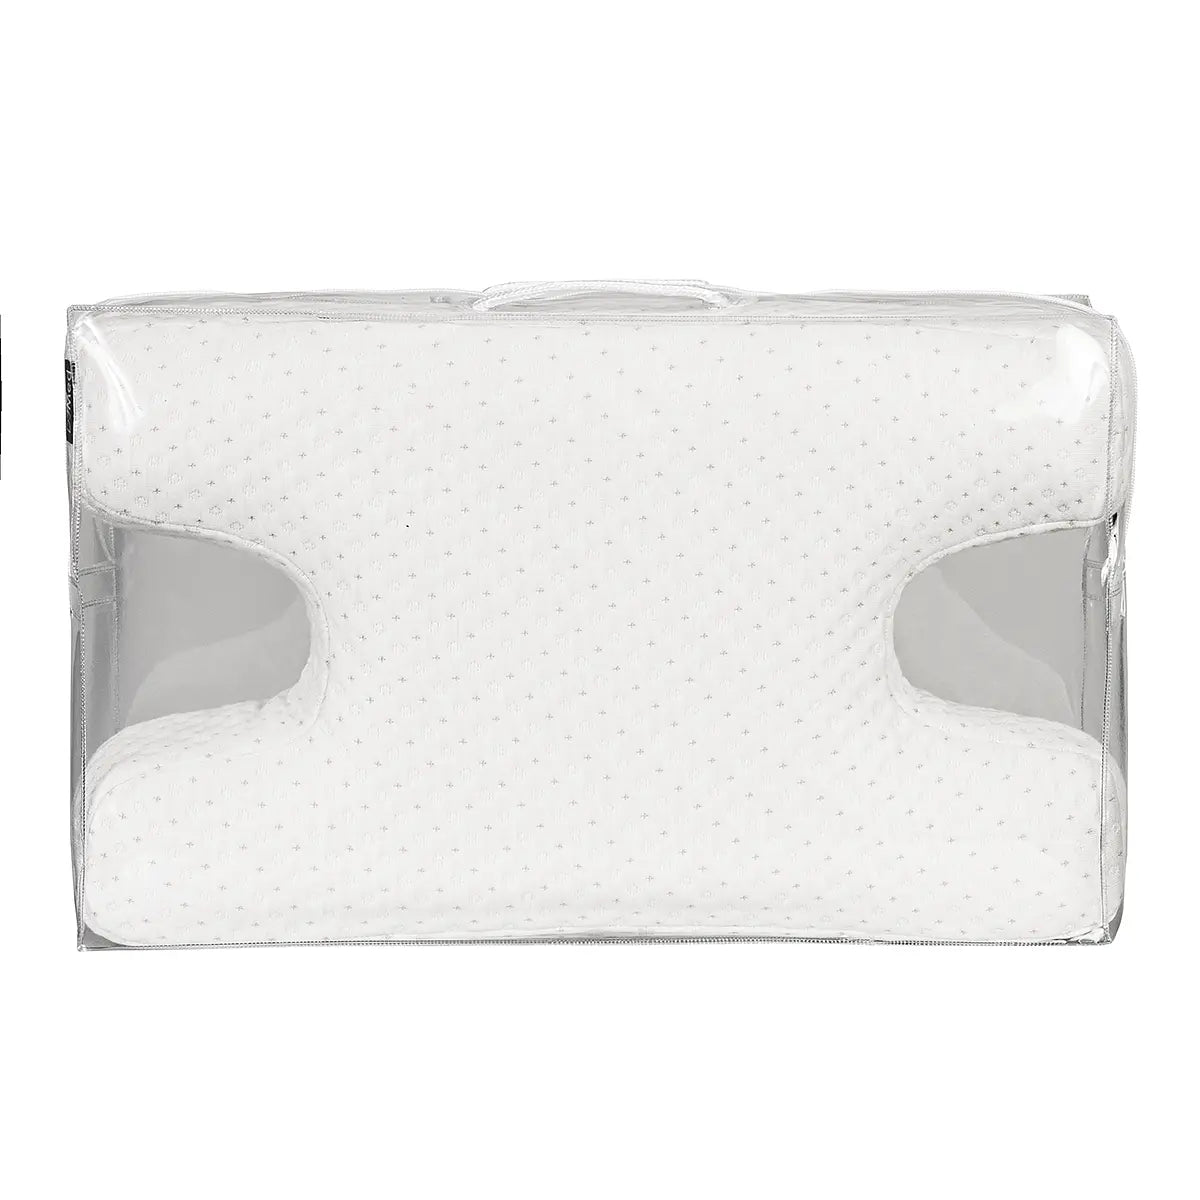 CPAP Pillow for Side Sleepers - with Side Cut-Outs